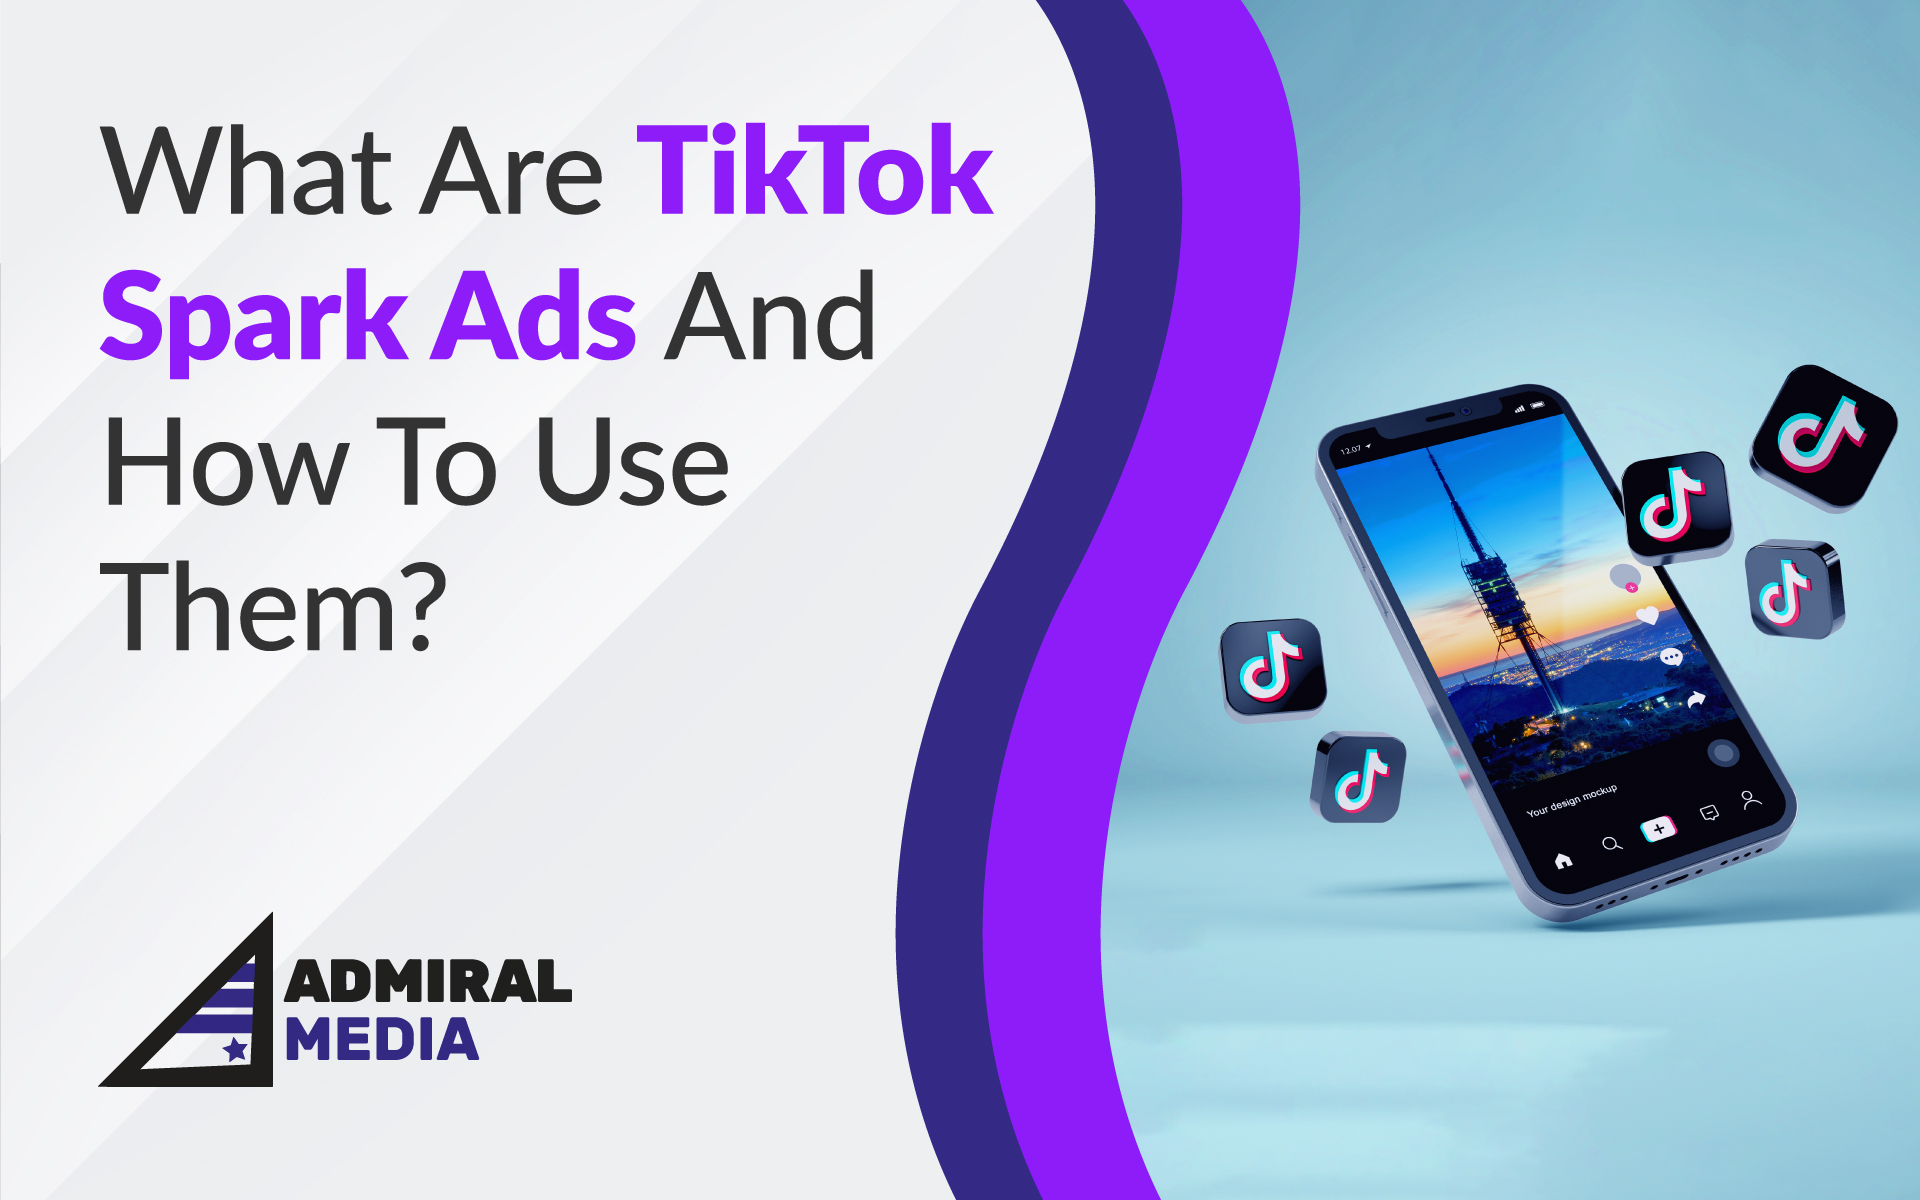 TikTok Spark Ads vs. Non-Spark Ads: What Marketers Should know